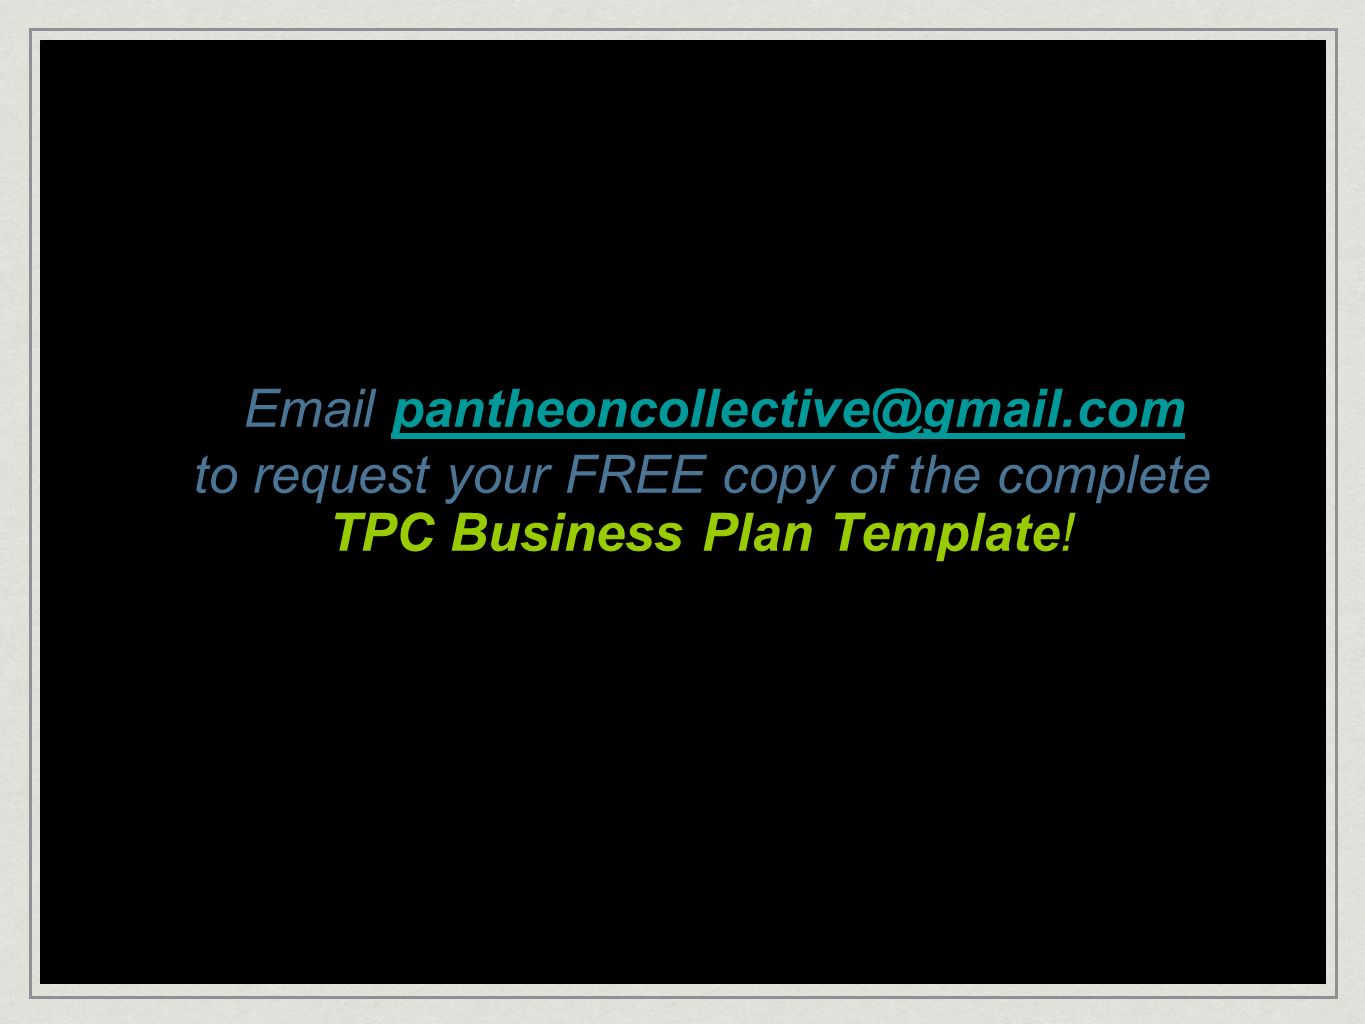 to request your FREE copy of the complete TPC Business Plan Template!